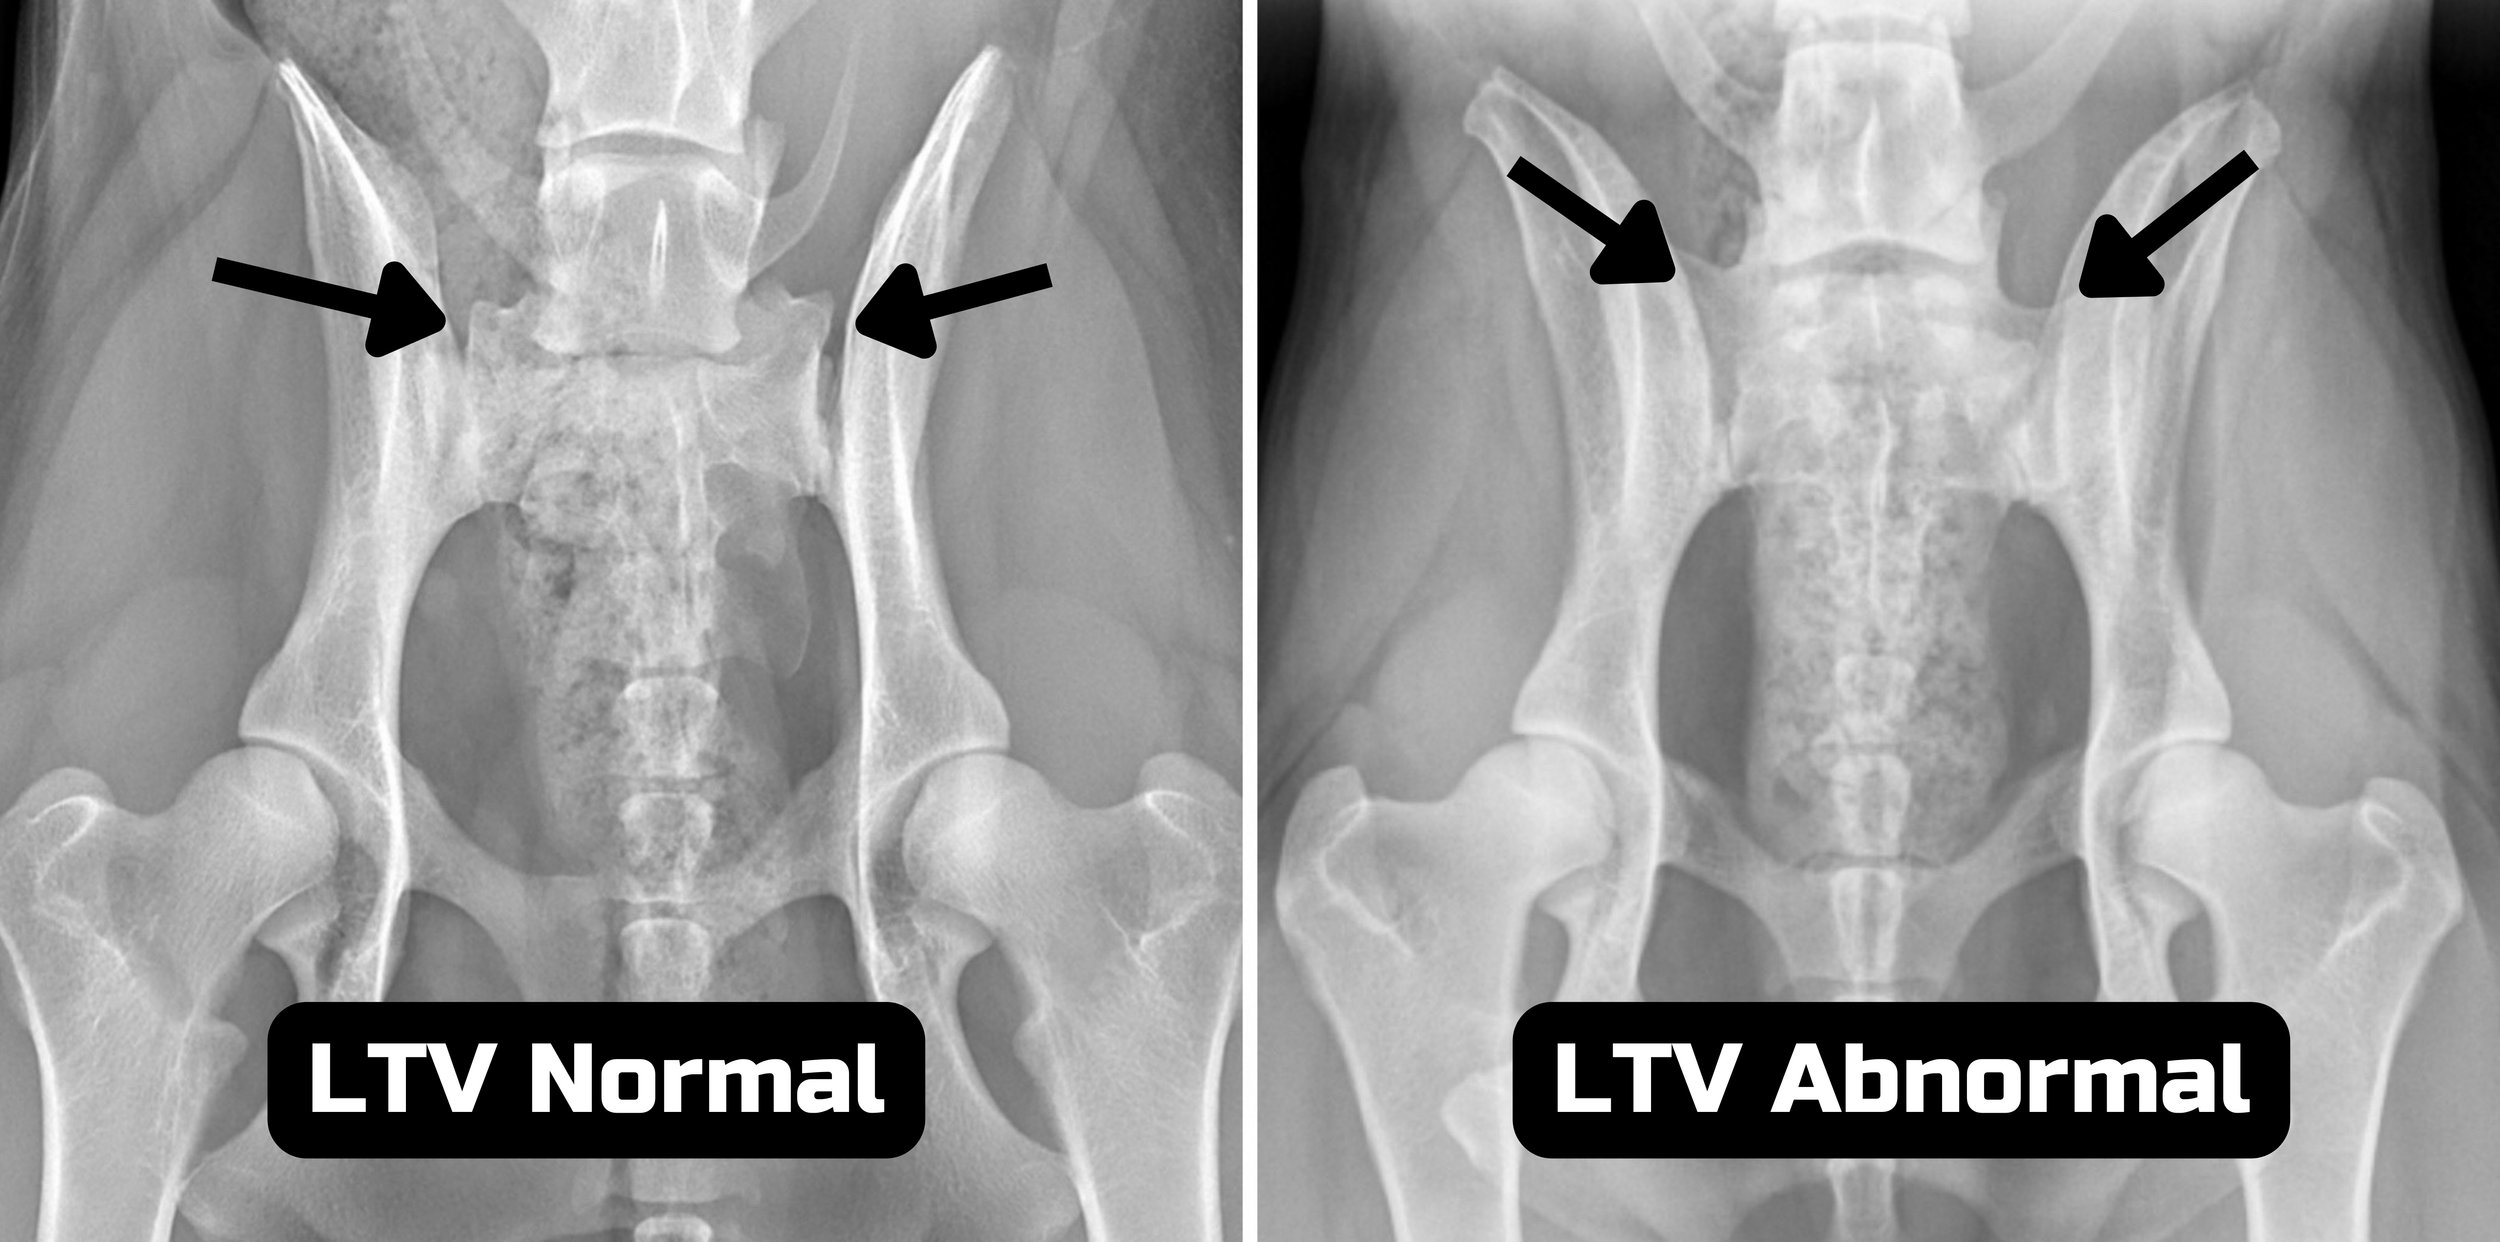 LTV normal and abnormal